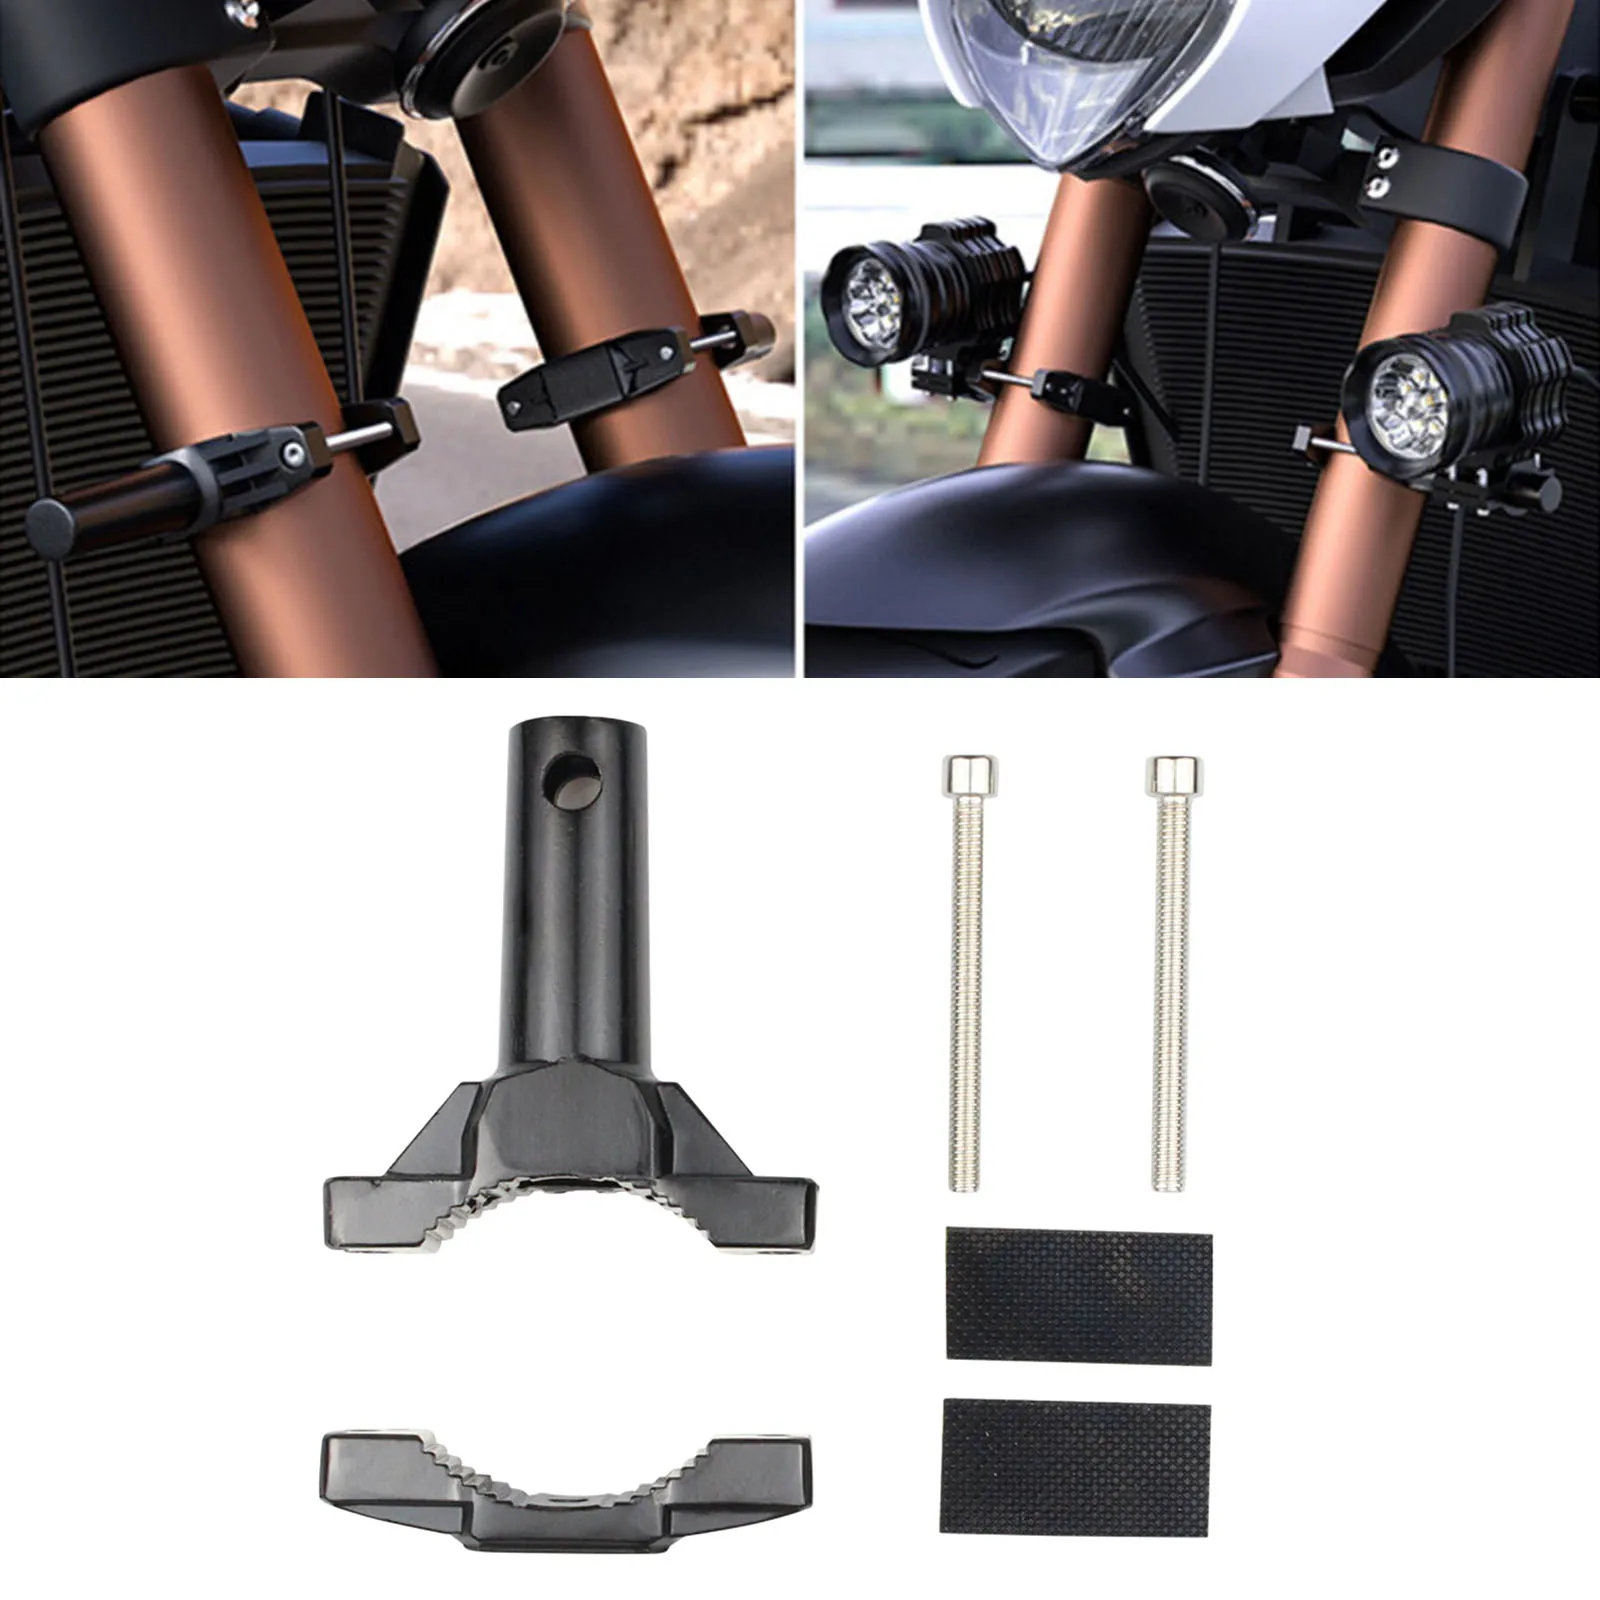 Universal Mount Bracket Mounting Brackets for Motorcycle Bumper Work Lights Electric Vehicles Round Tubes Roll Cages Handlebars